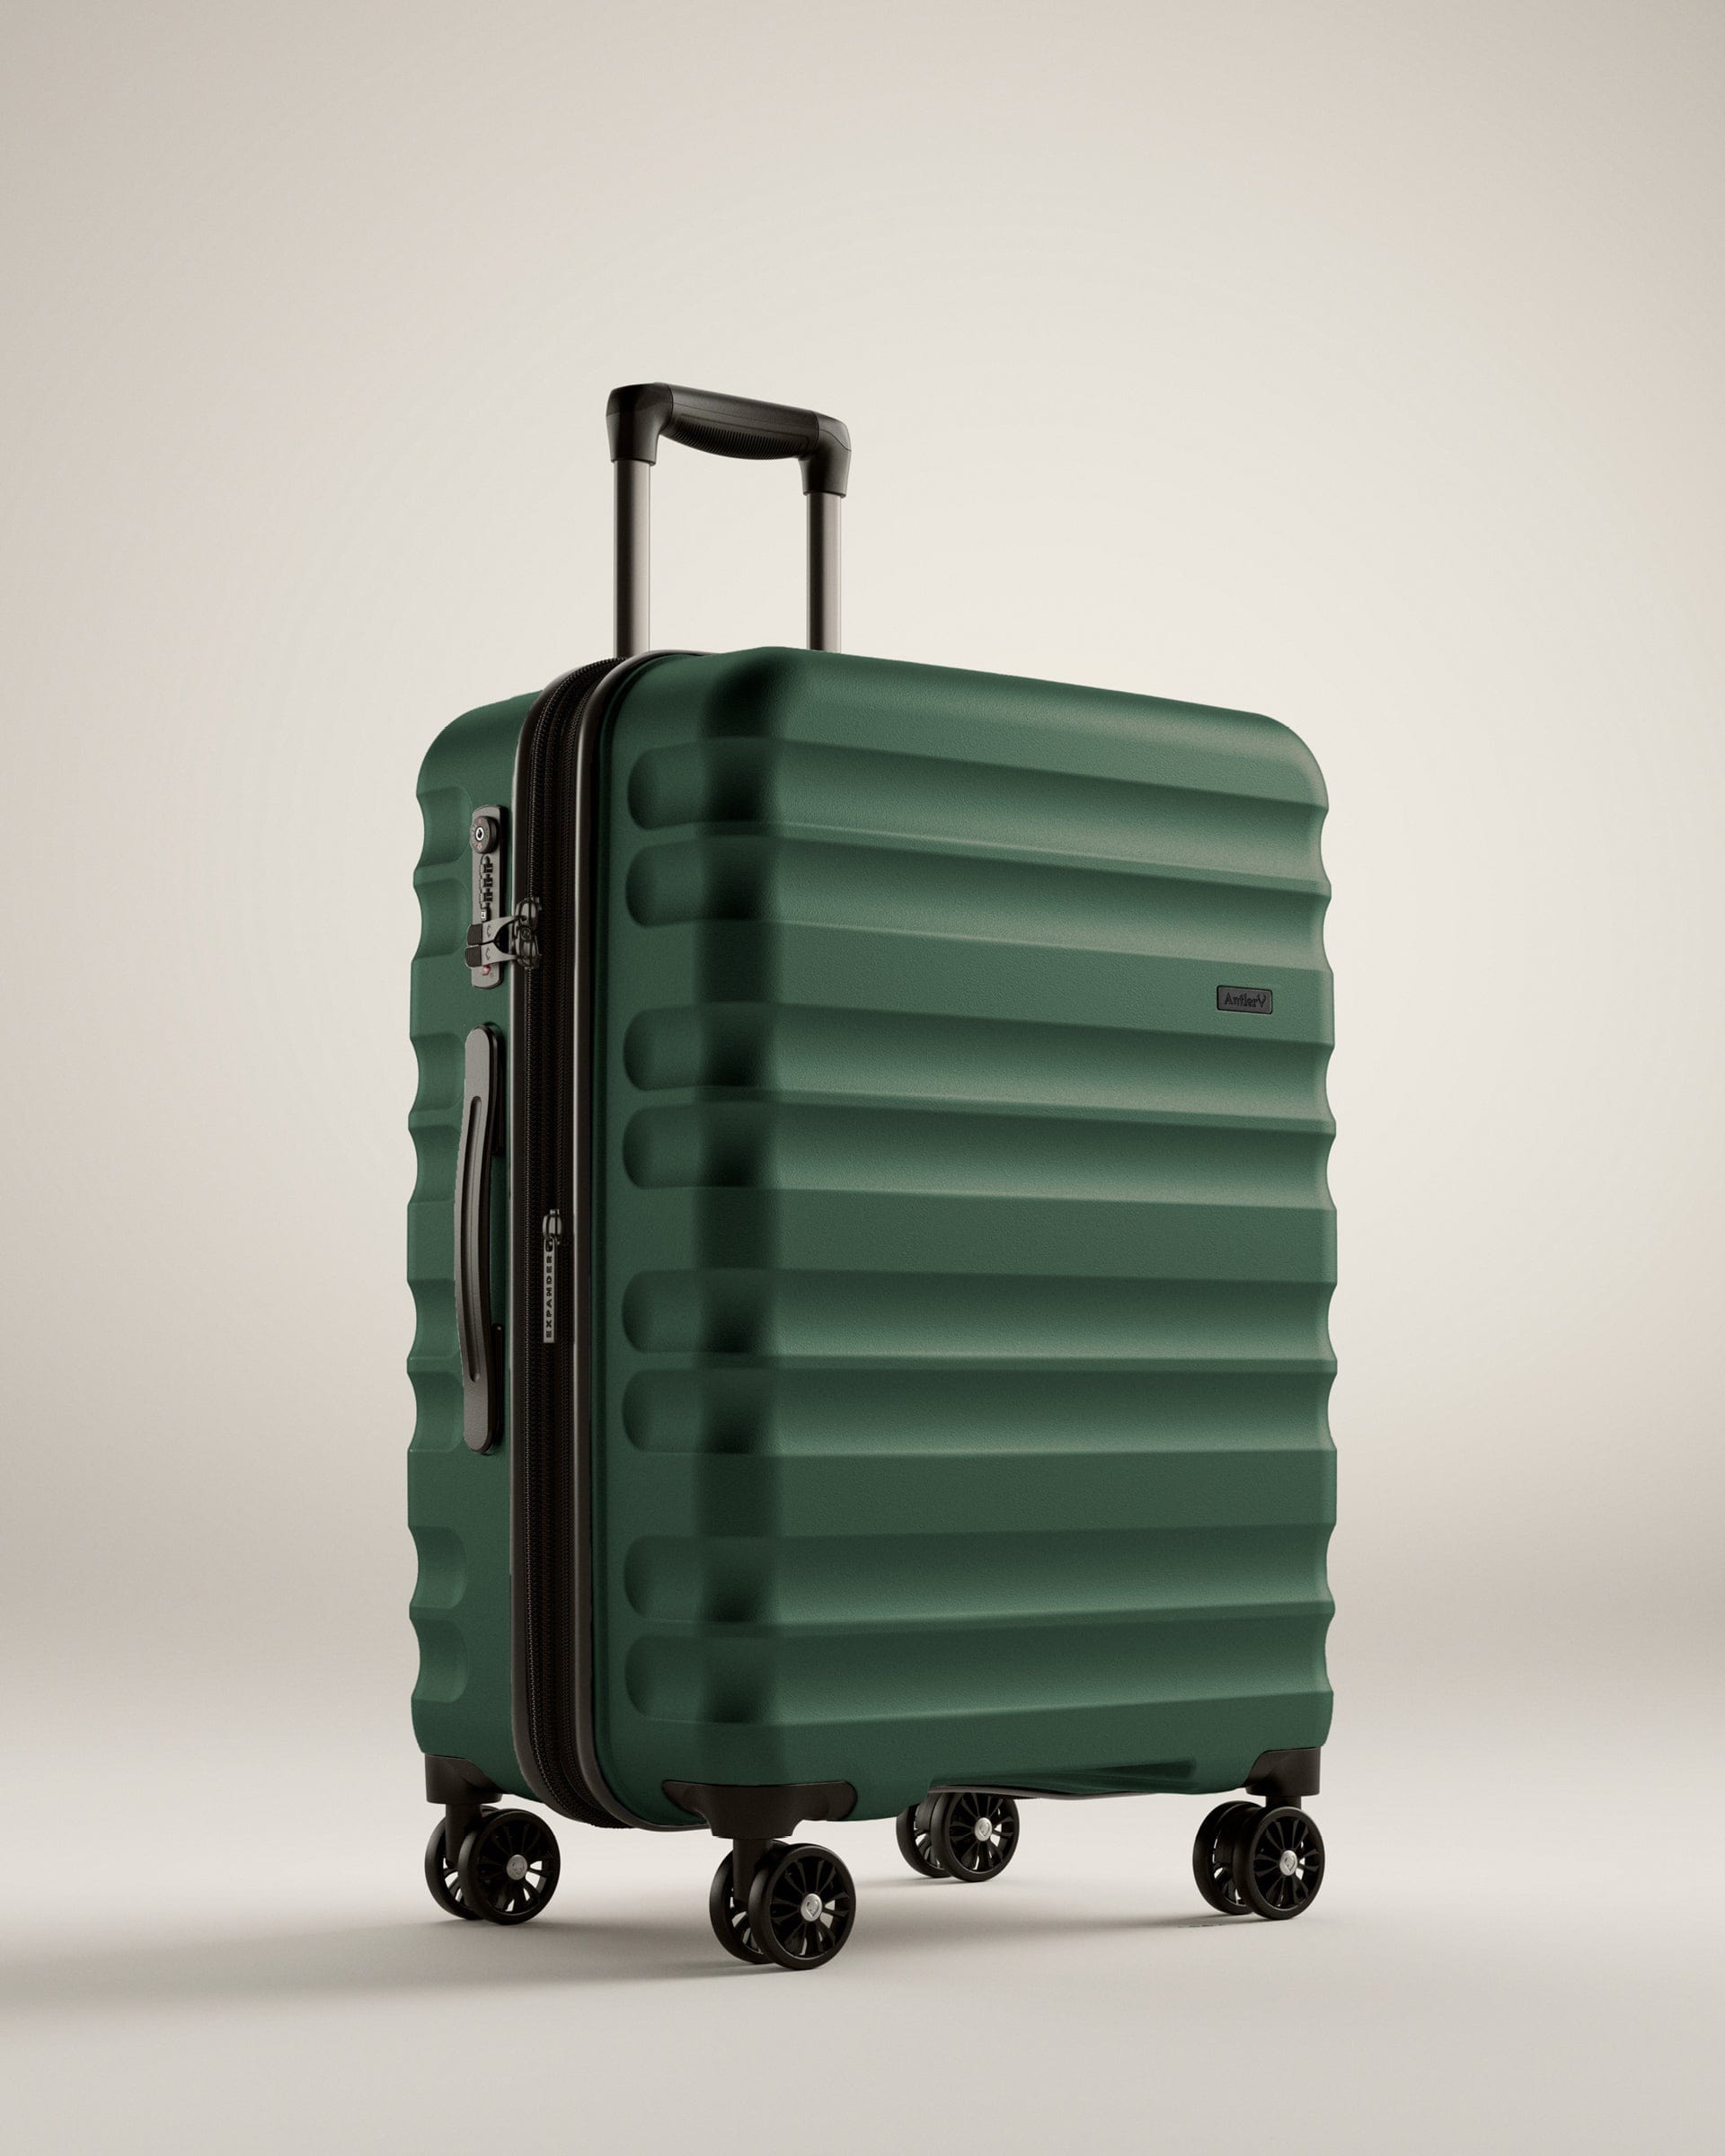 View Antler Clifton Medium Suitcase In Woodland Green Size 30 x 45 x 67 cm information